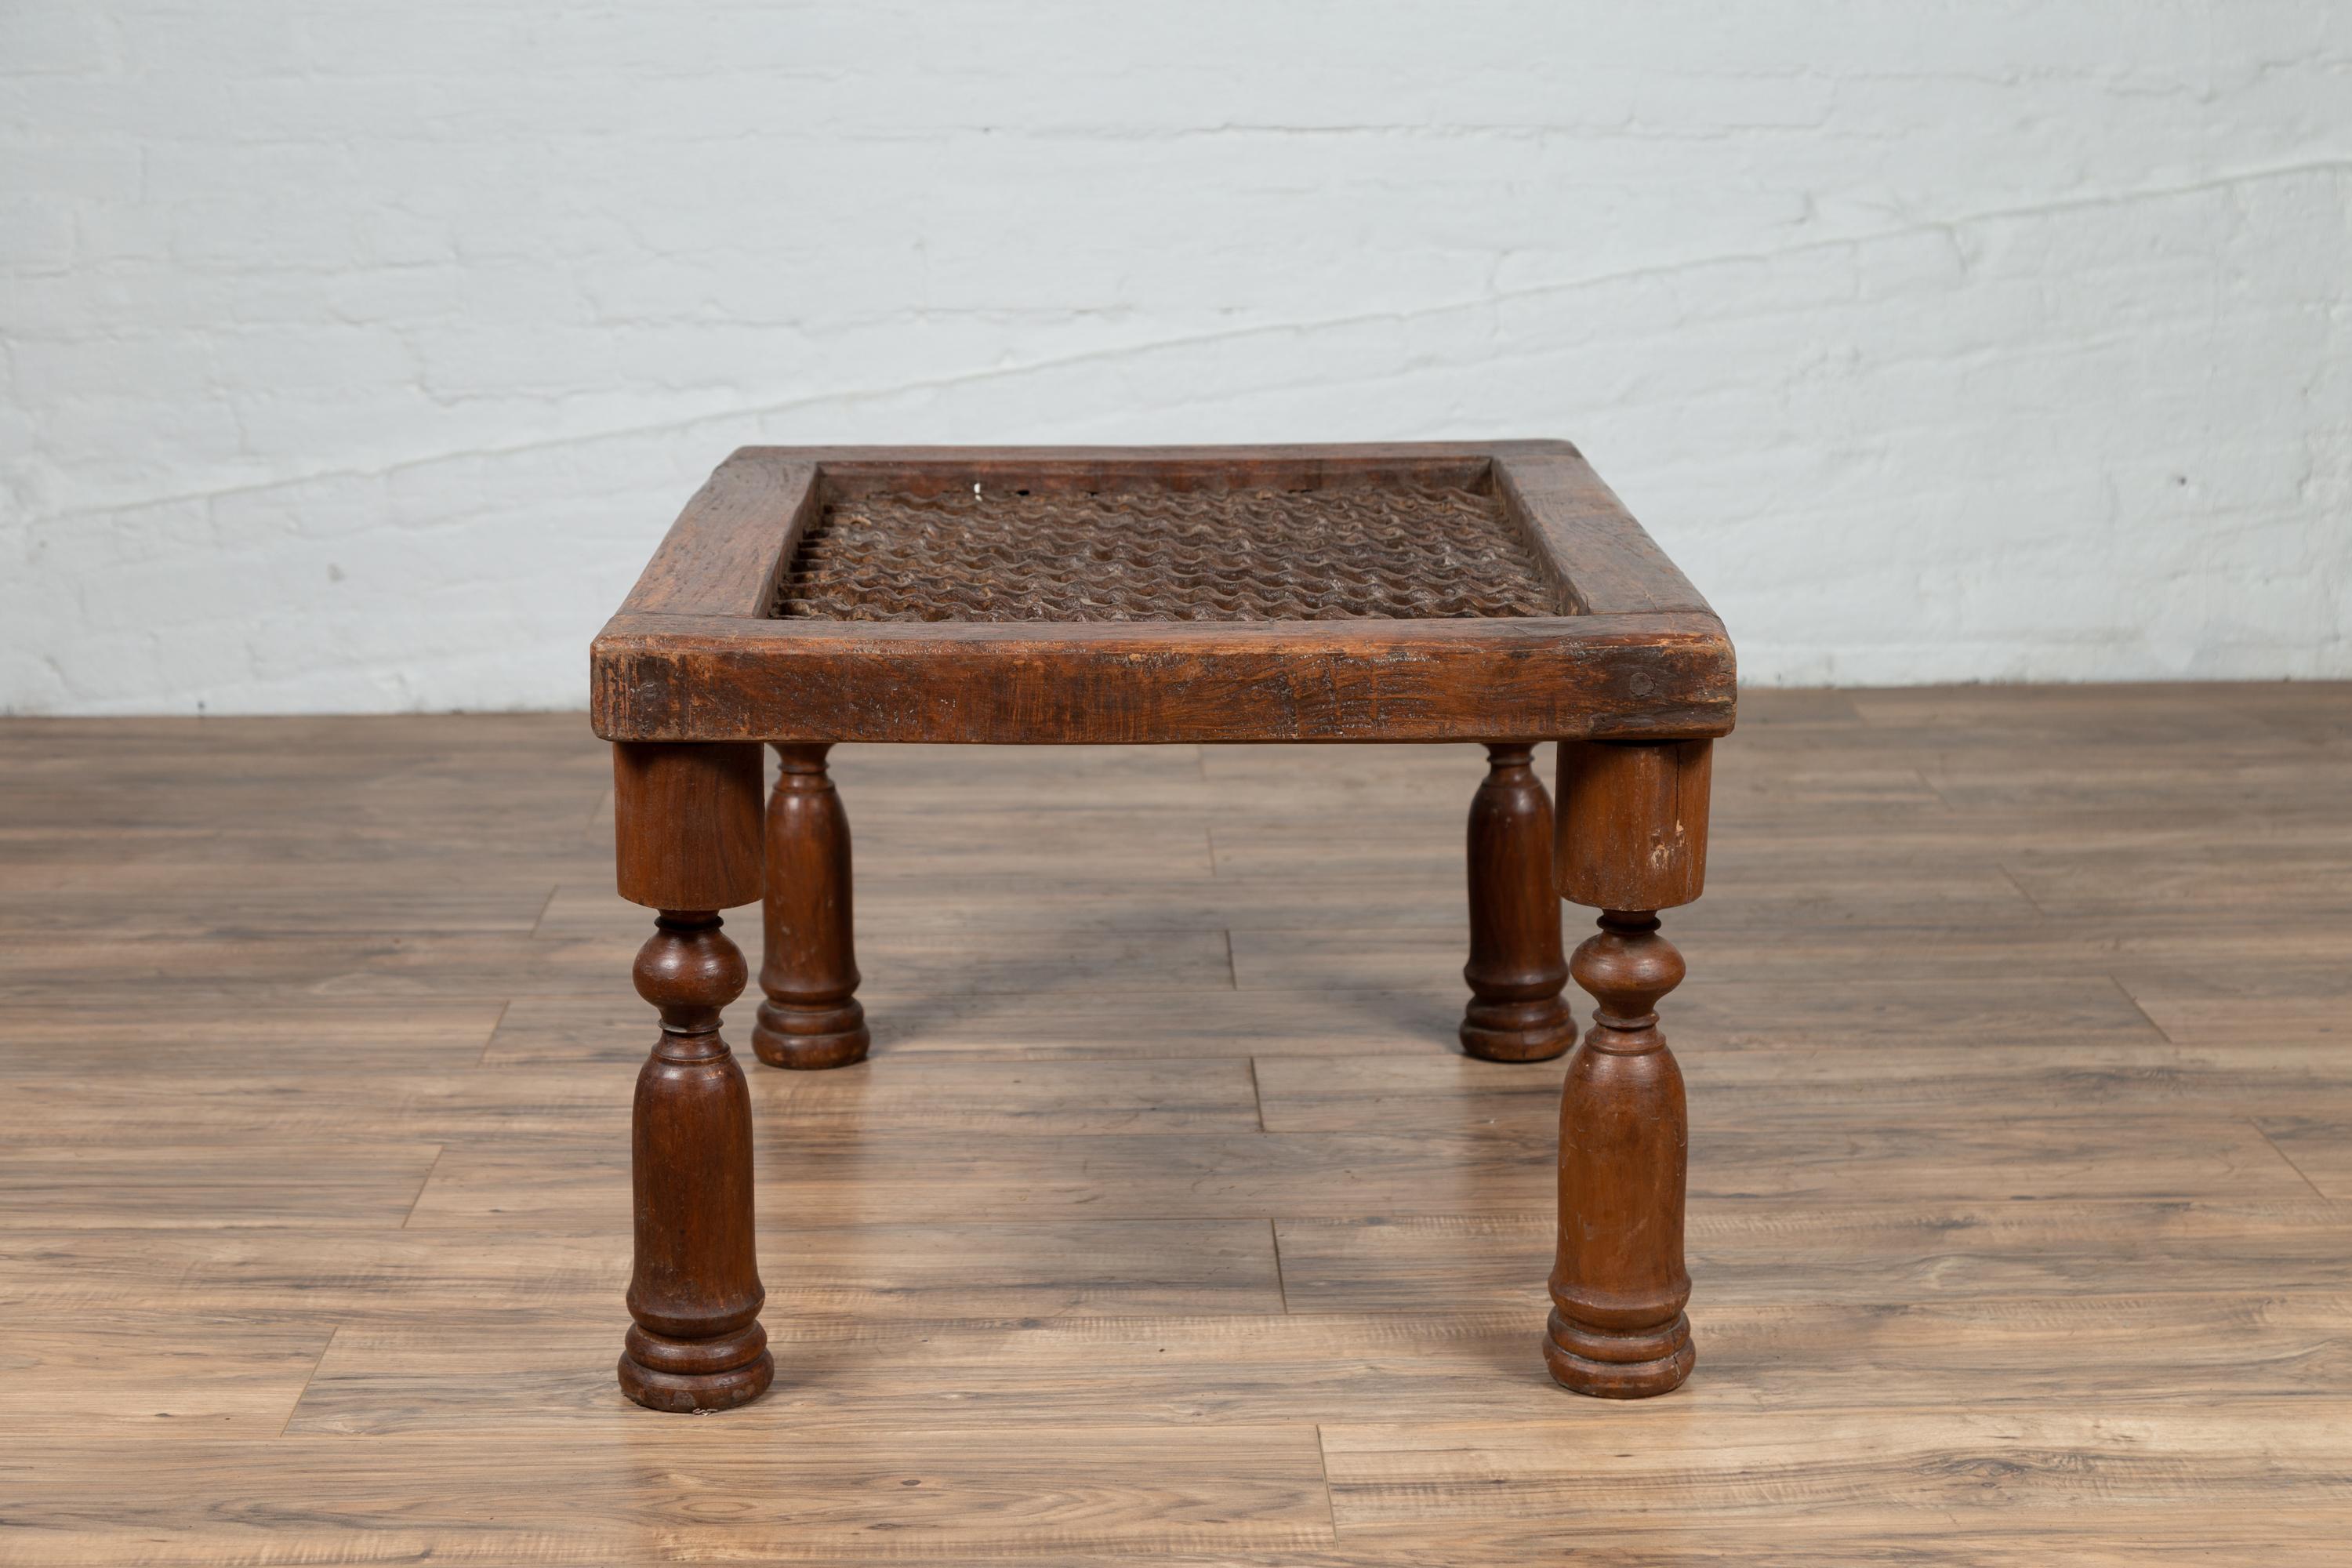 Antique Indian Window Grate Made into a Low Side Table with Turned Baluster Legs 3